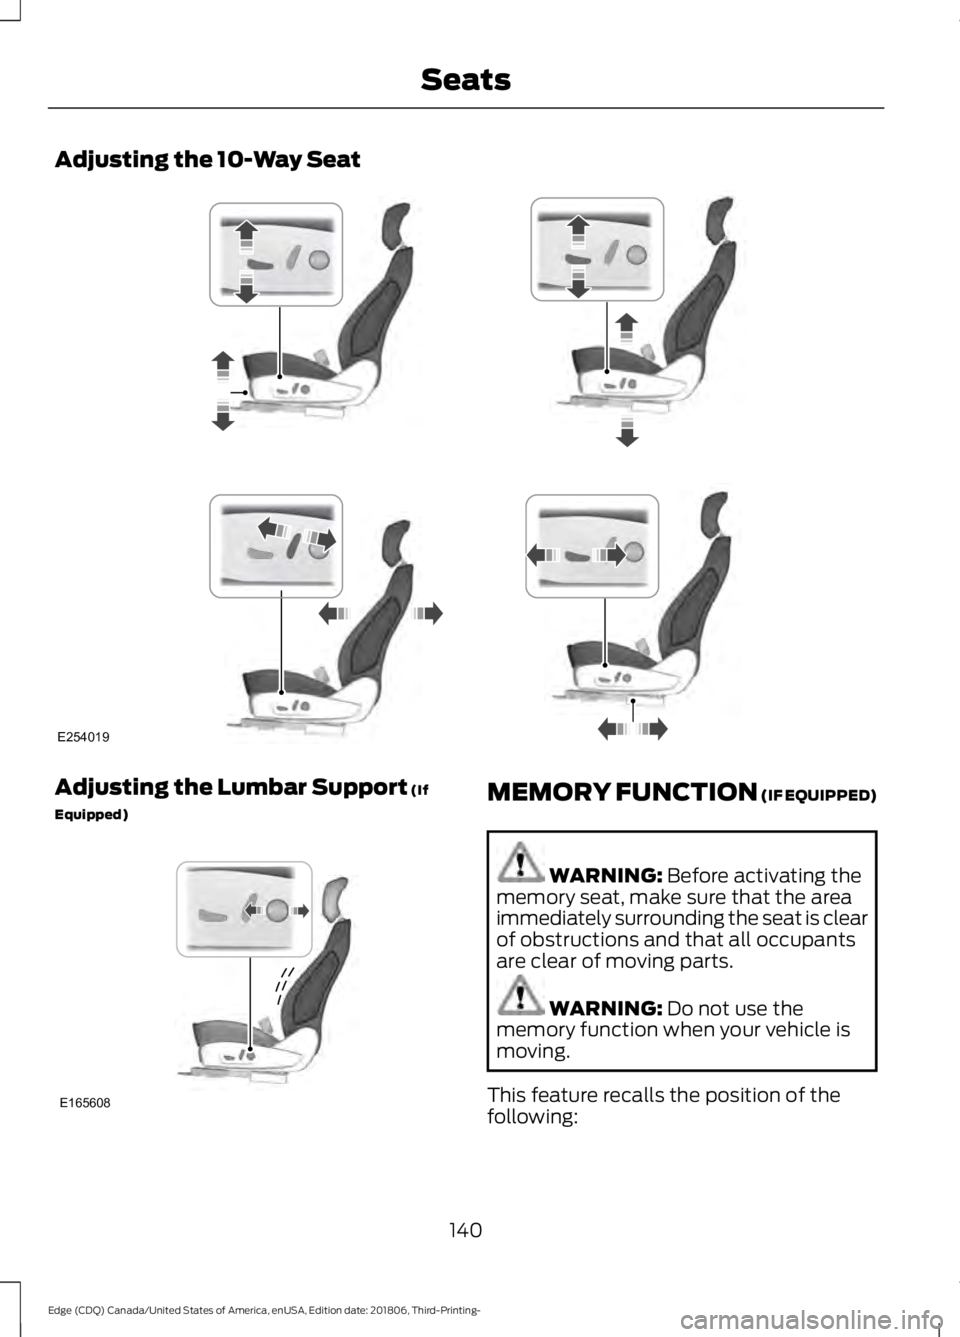 FORD EDGE 2019  Owners Manual Adjusting the 10-Way Seat
Adjusting the Lumbar Support (If
Equipped) MEMORY FUNCTION (IF EQUIPPED)
WARNING: 
Before activating the
memory seat, make sure that the area
immediately surrounding the seat